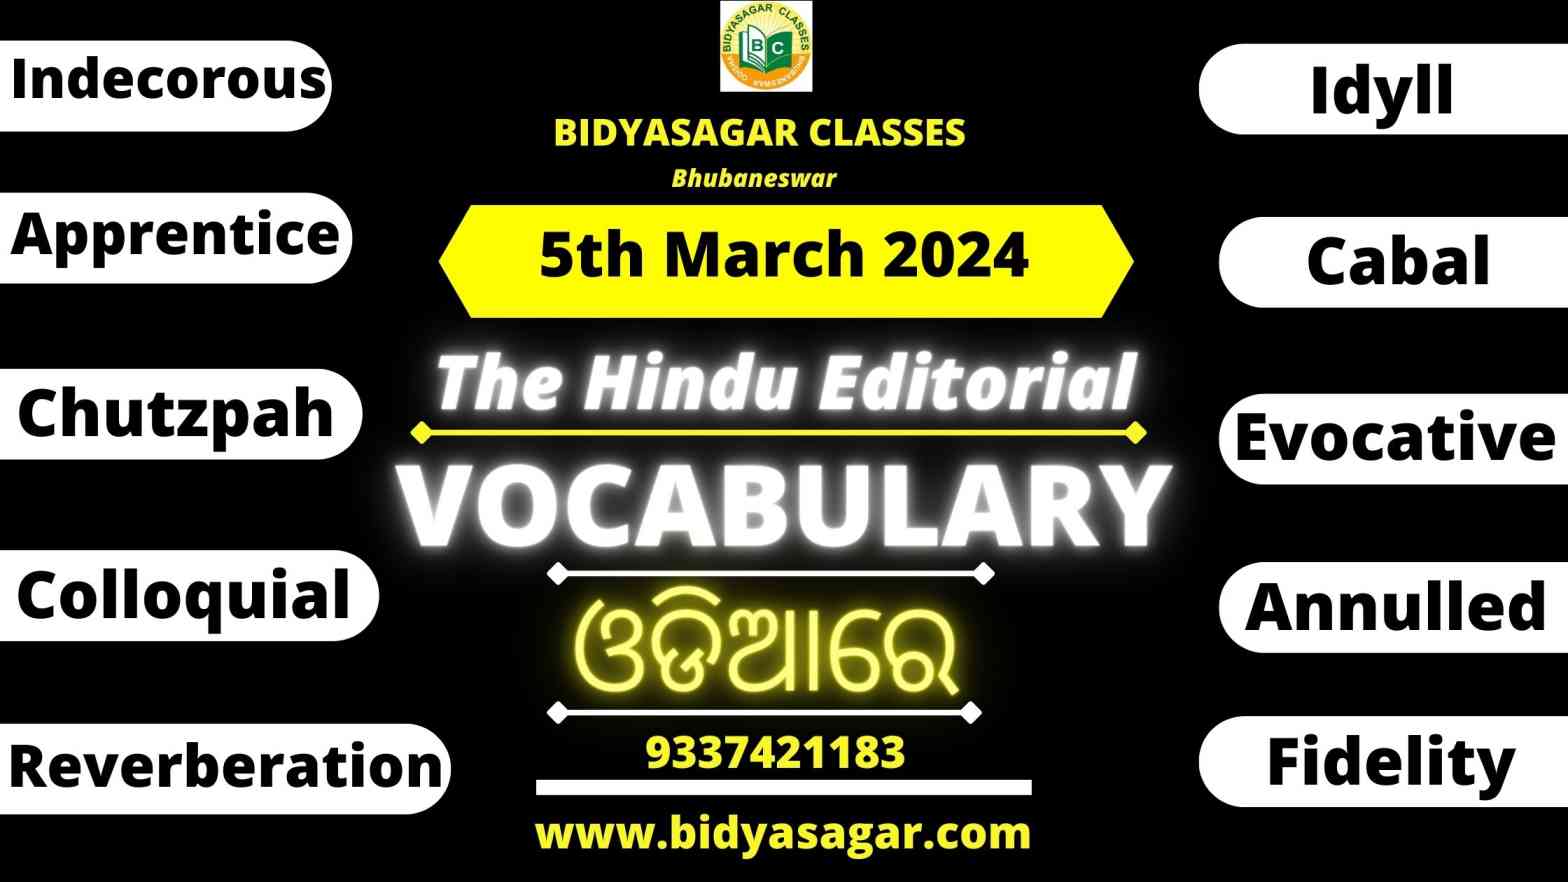 The Hindu Editorial Vocabulary of 5th March 2024